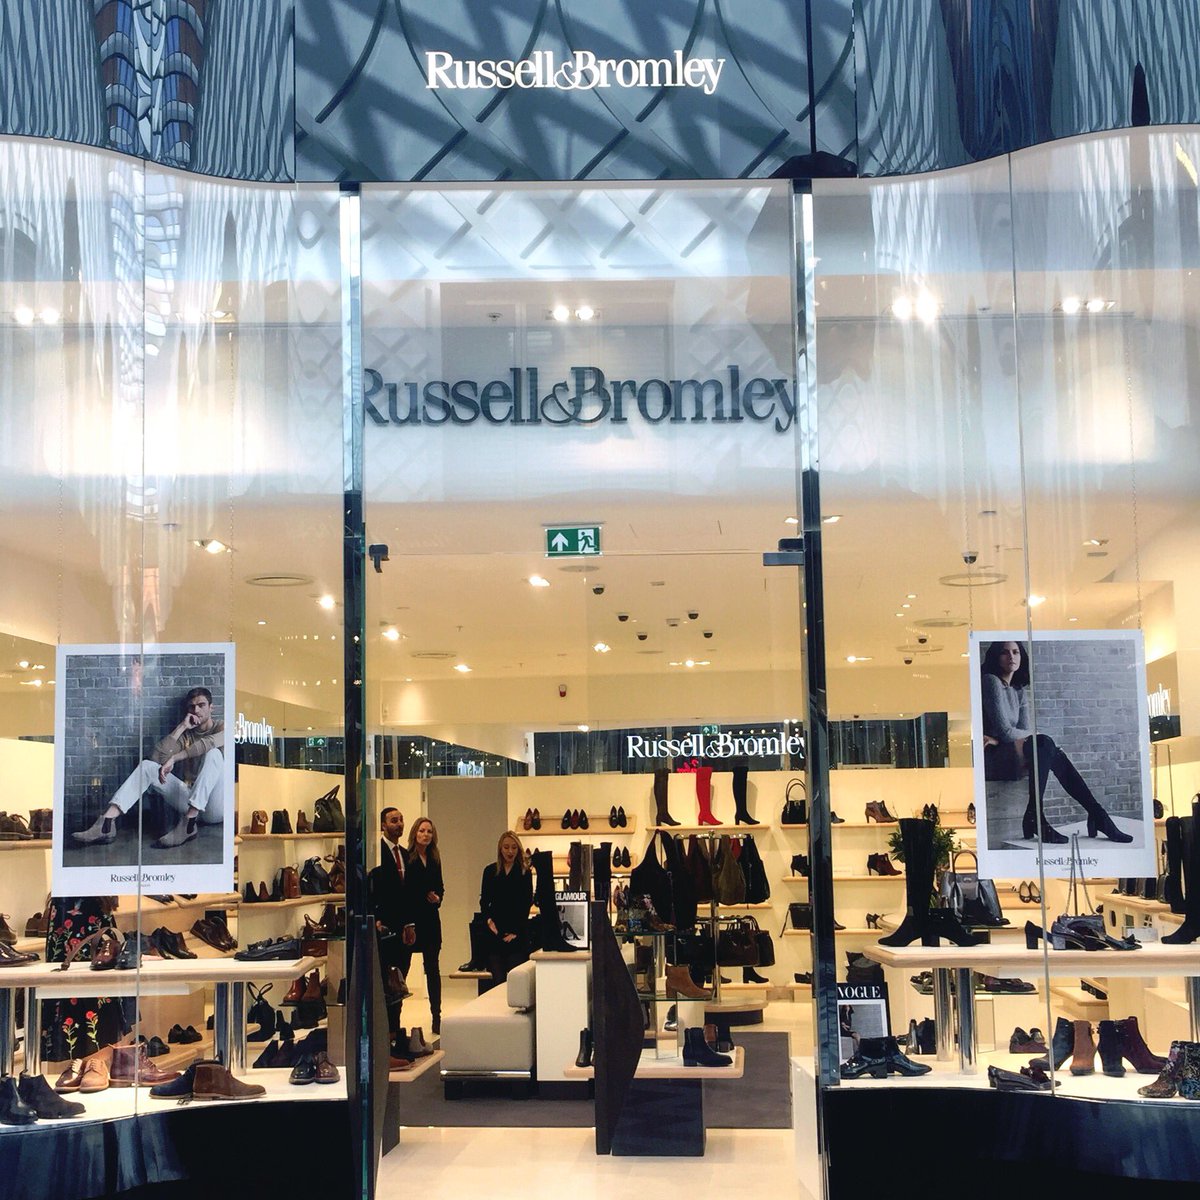 russell & bromley stores